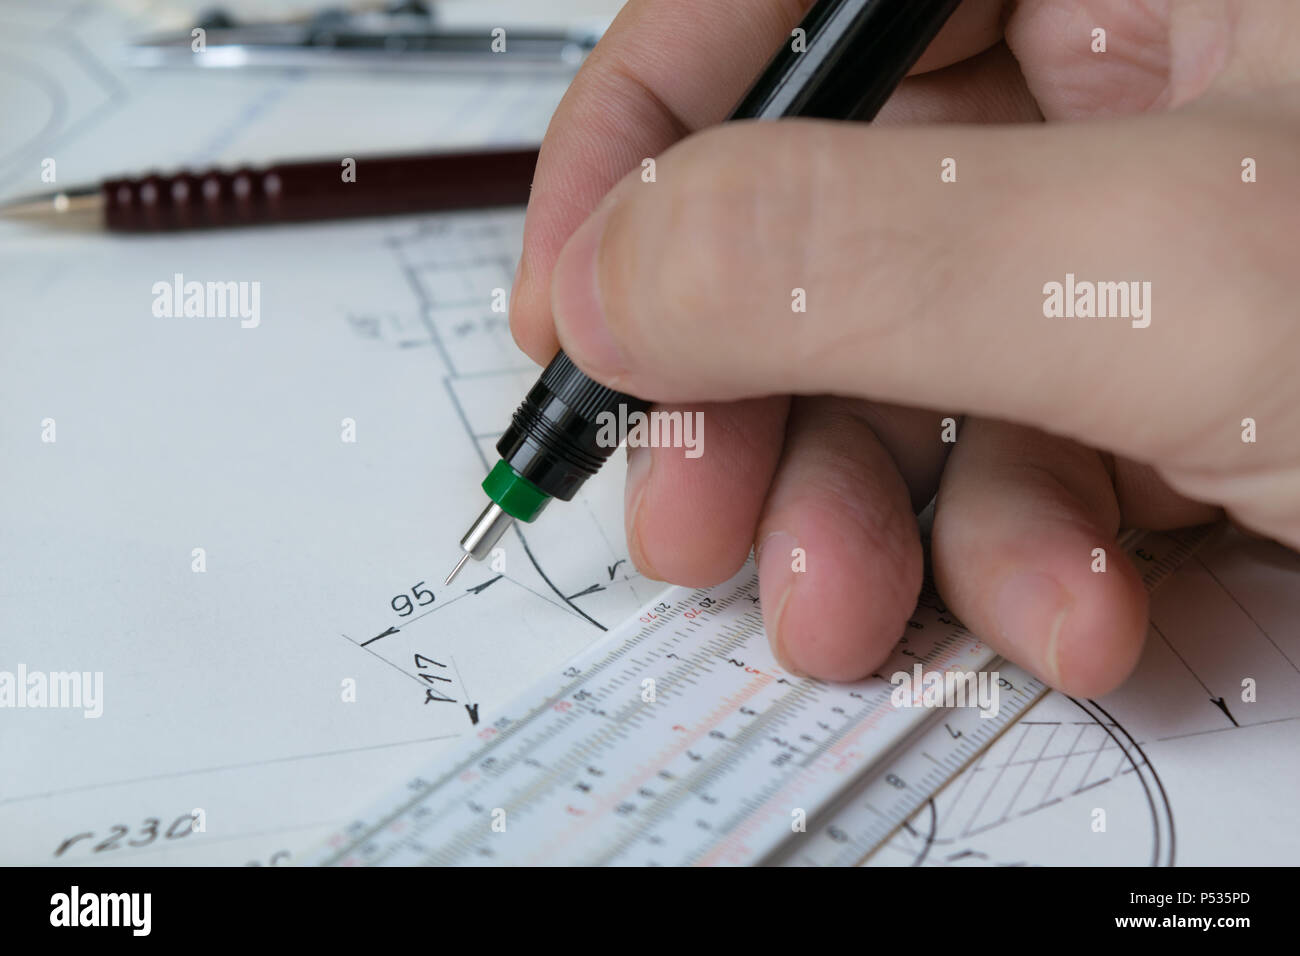 Engineer holding technical pen and works on a hand drawn technical drawing, sliderule Stock Photo